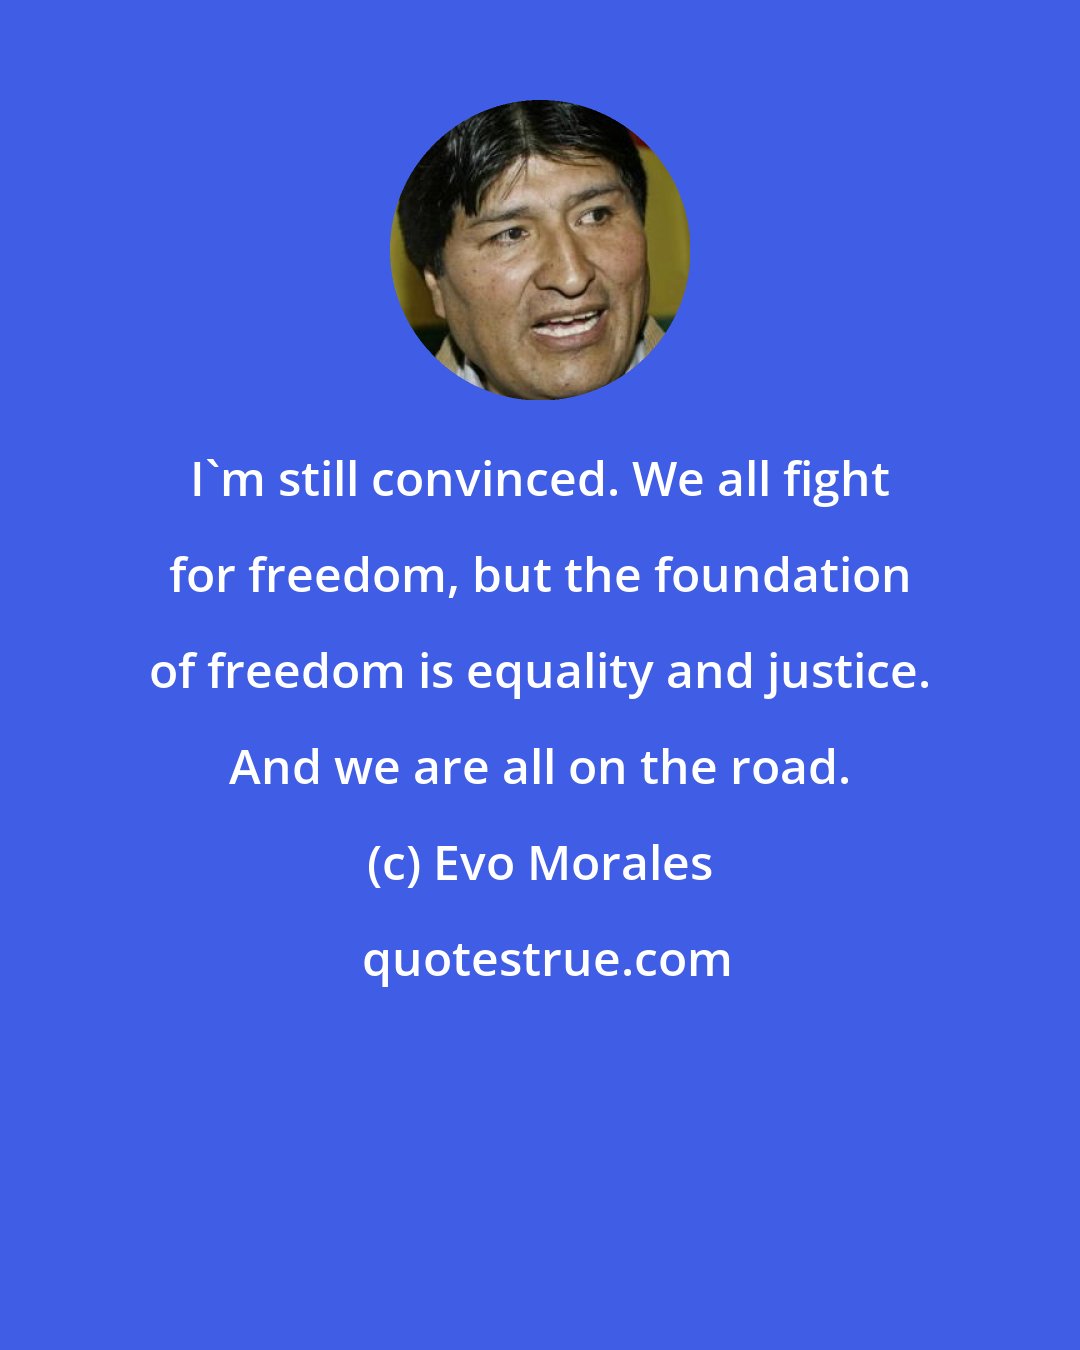 Evo Morales: I'm still convinced. We all fight for freedom, but the foundation of freedom is equality and justice. And we are all on the road.